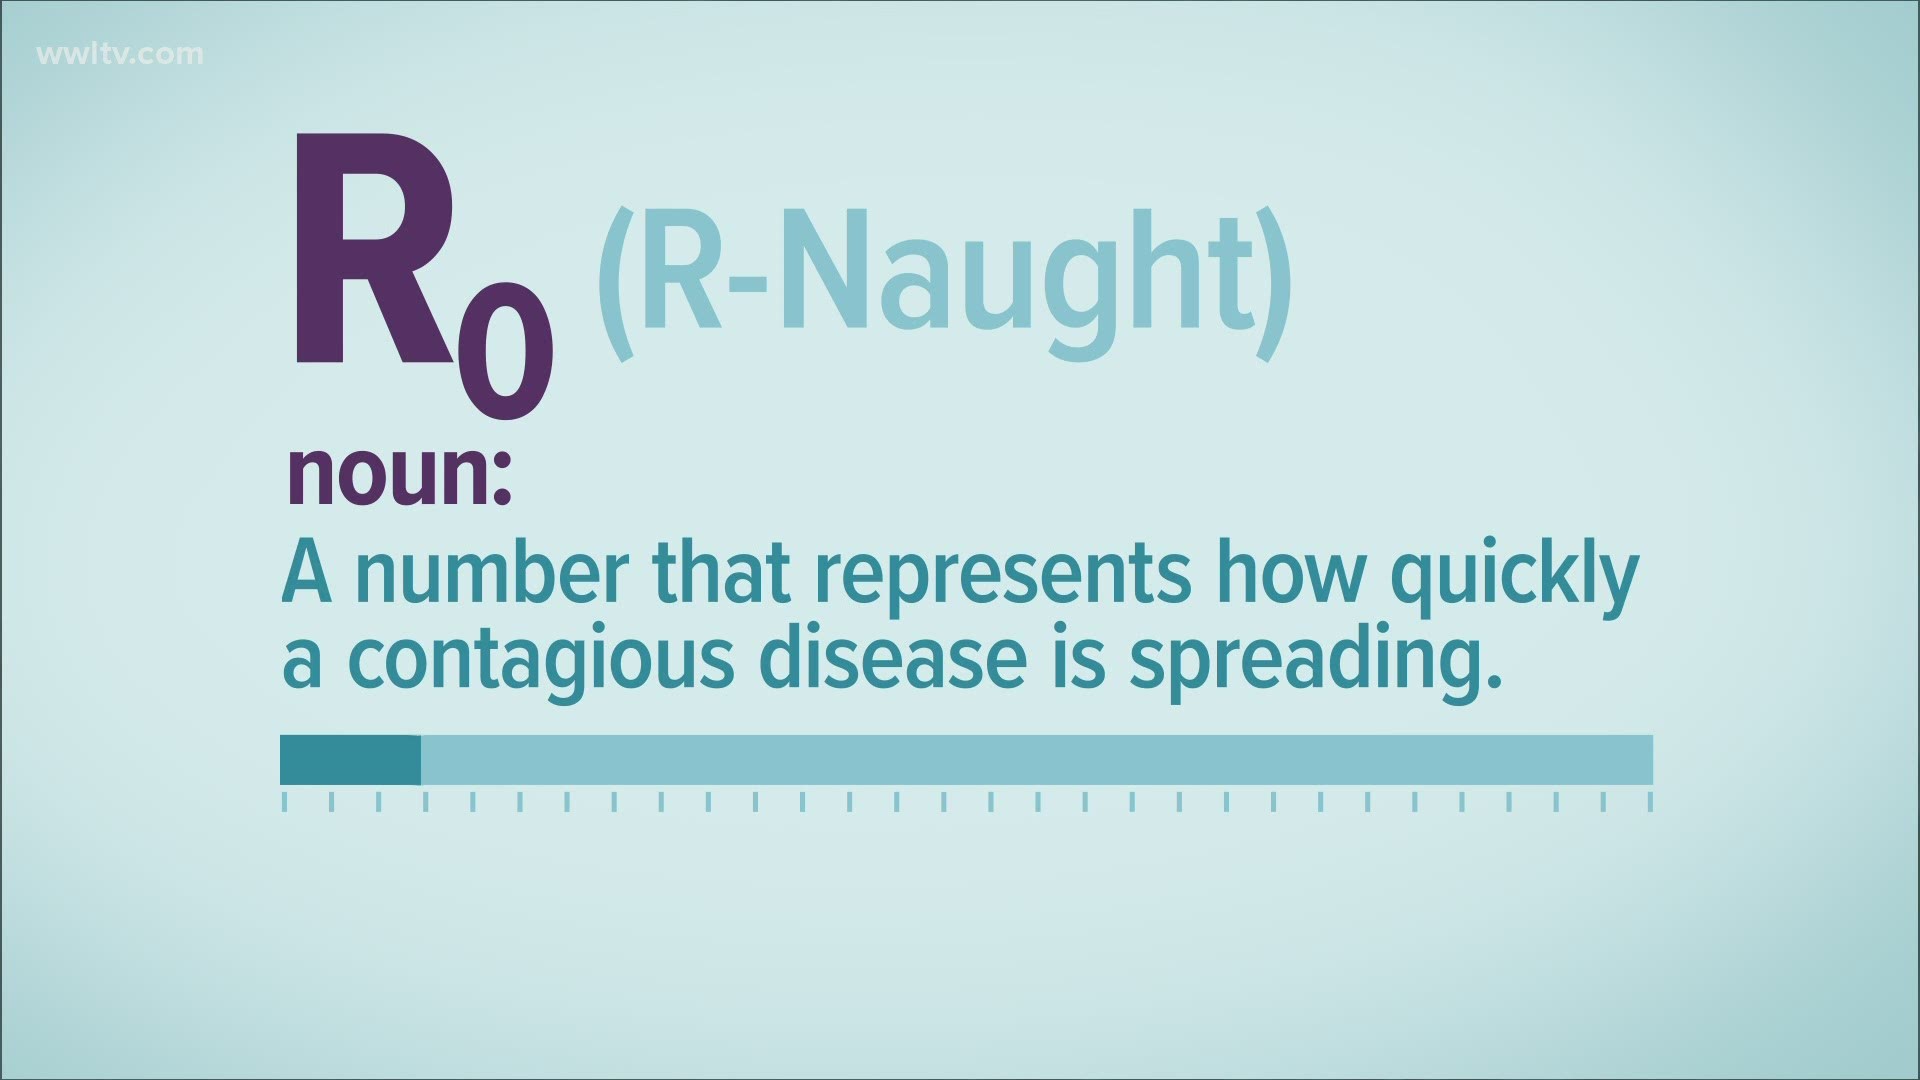 You've heard some terms used during the coronavirus outbreak. One of them is R-naught. It's fairly important, but what does it mean?